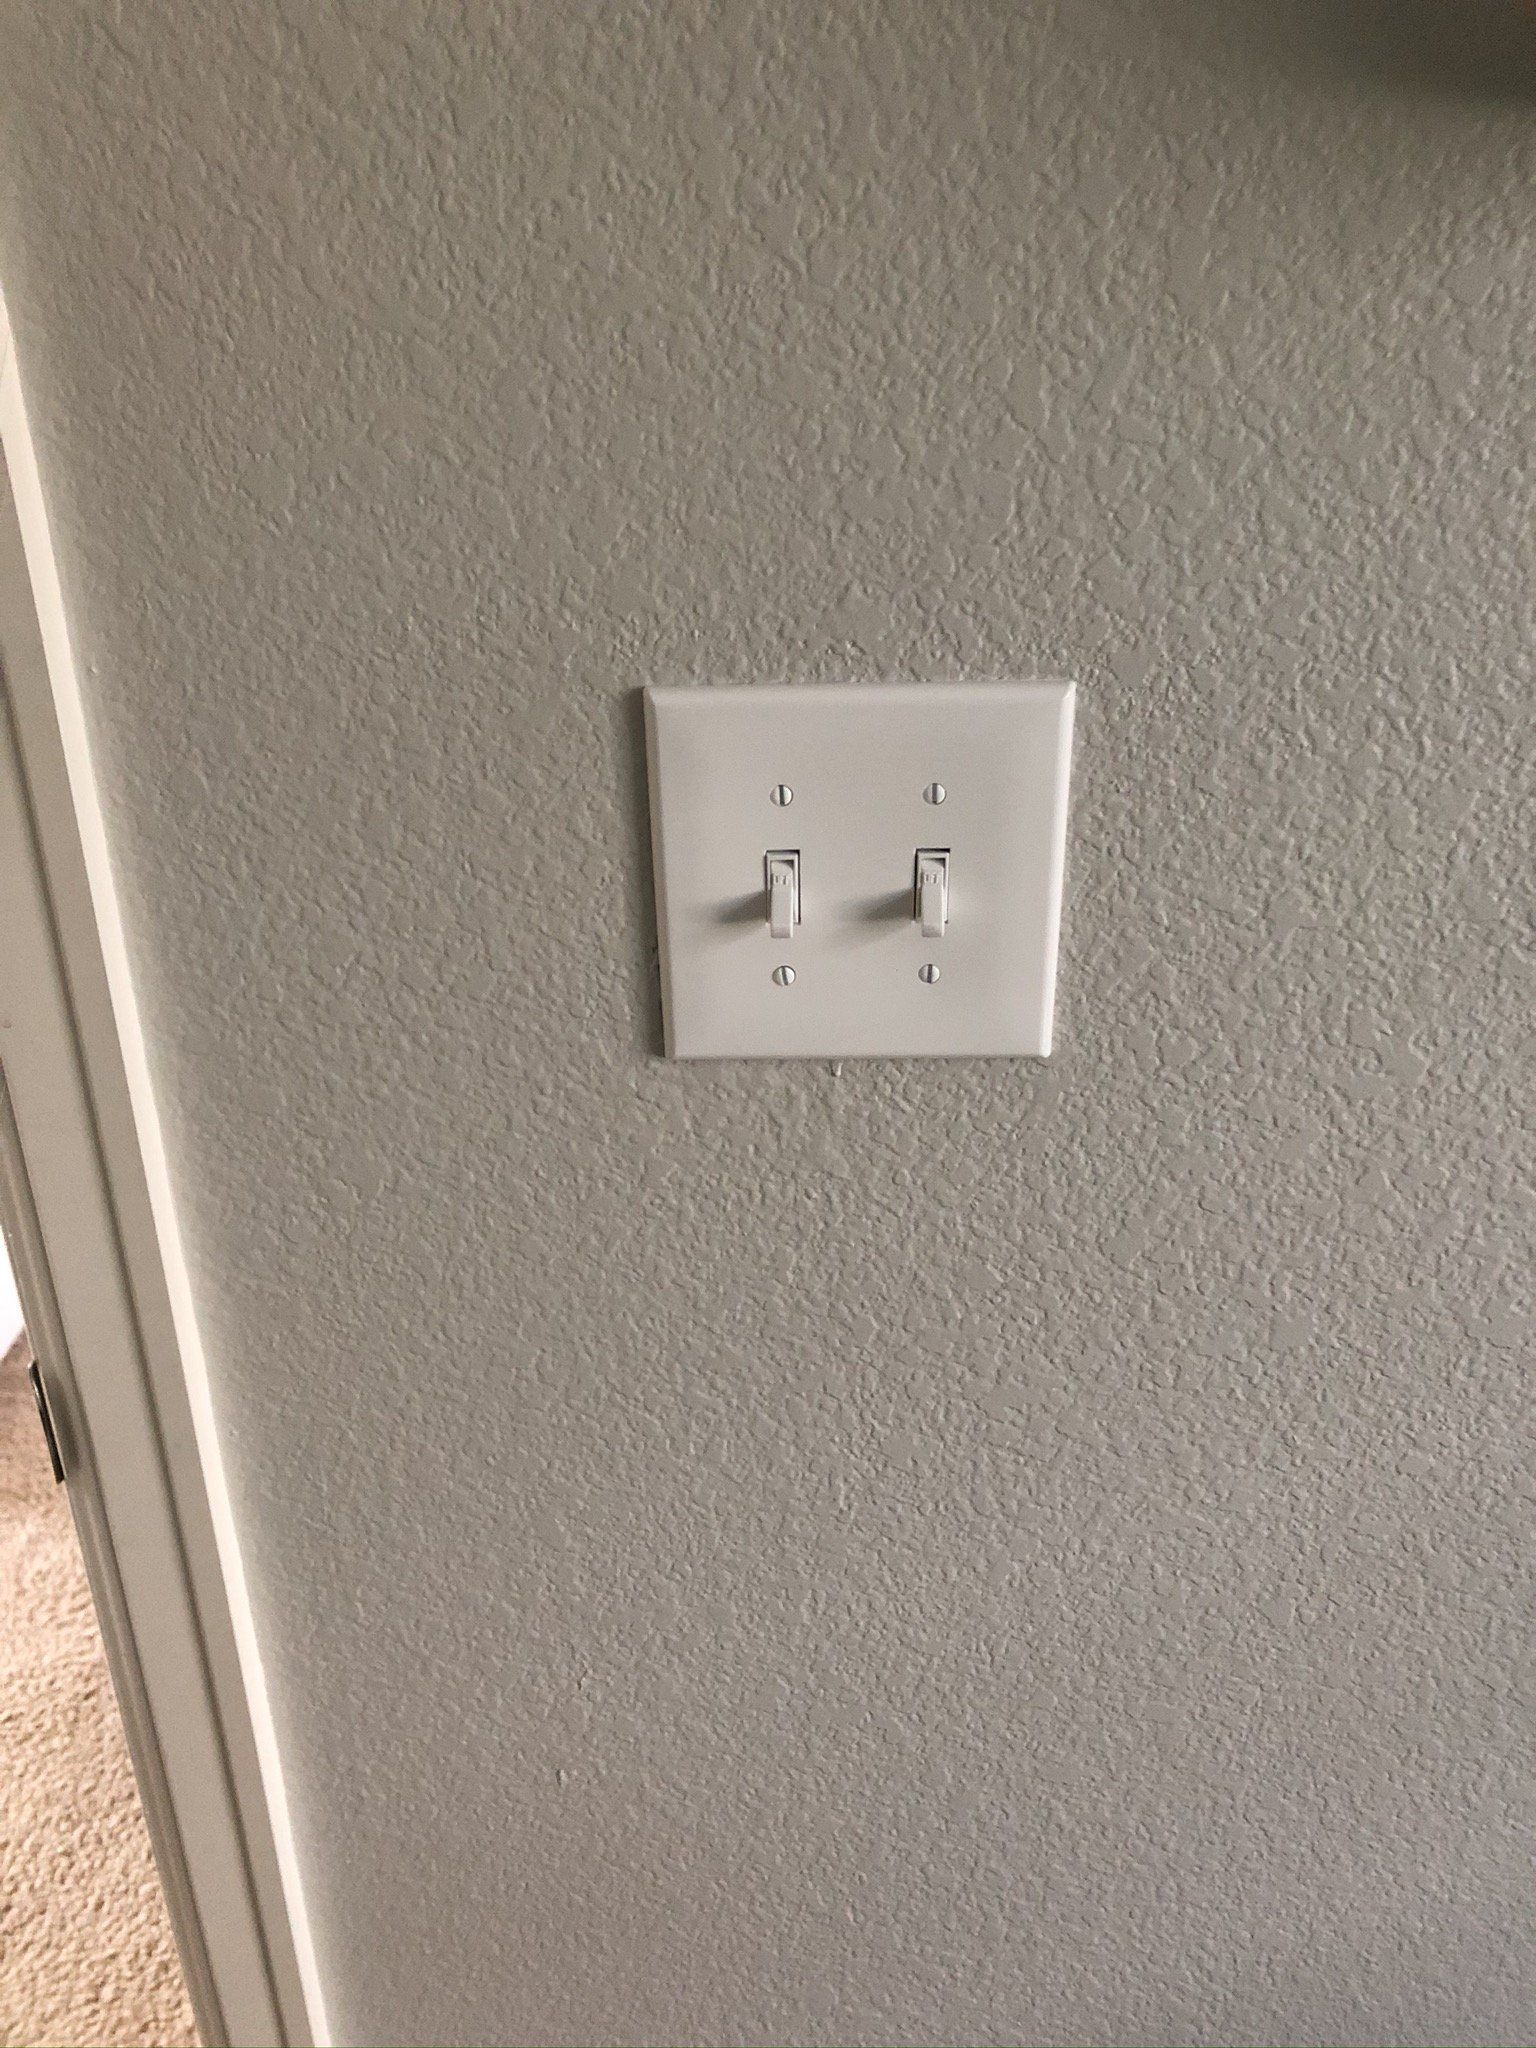 Close up of finger is turning on or off on light switch.